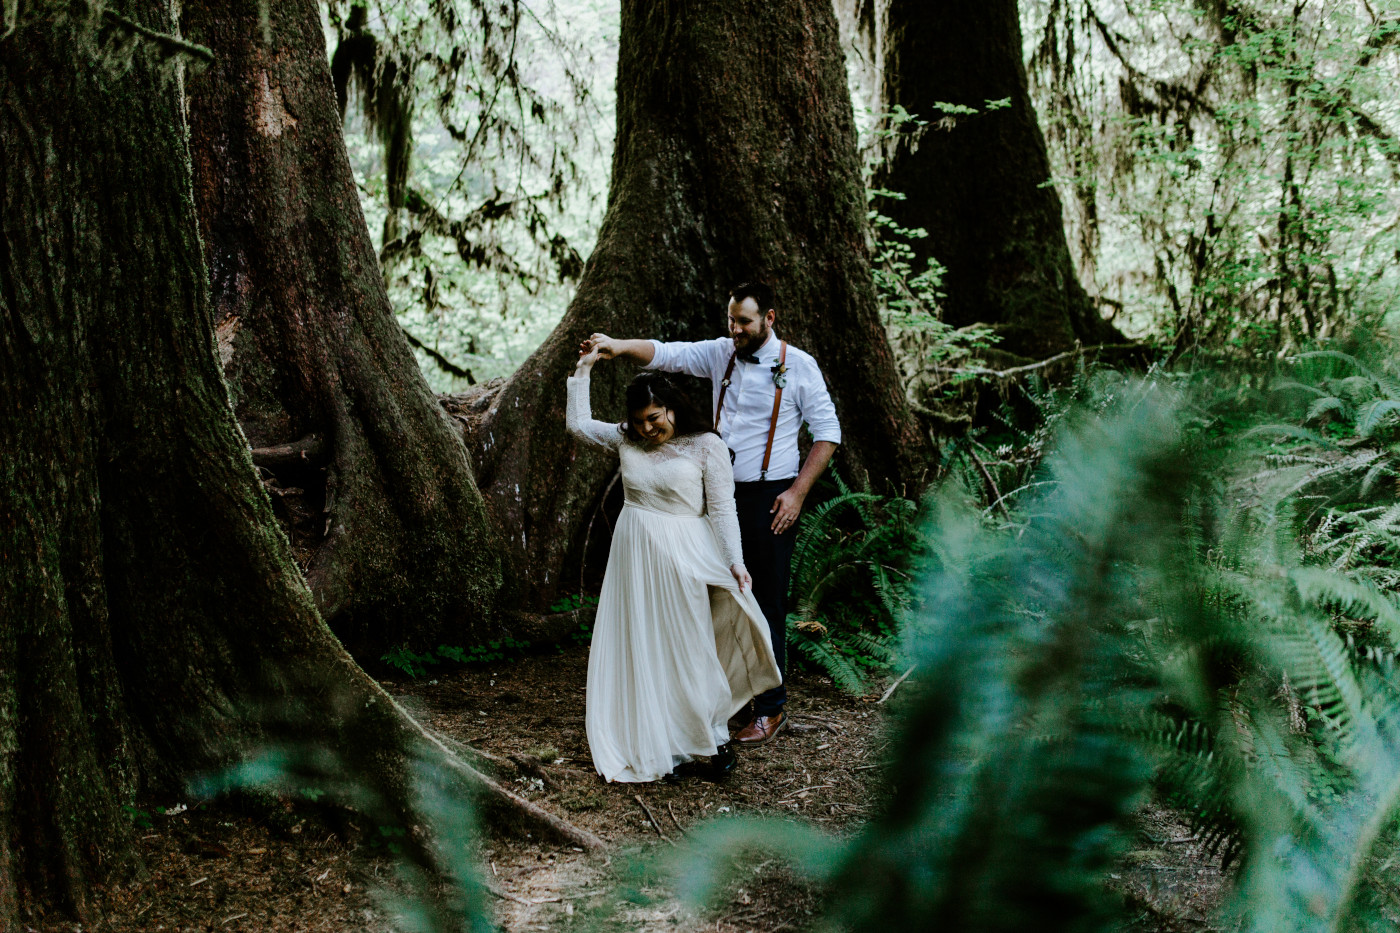 Jack and Brooke dance. Elopement photography at Olympic National Park by Sienna Plus Josh.